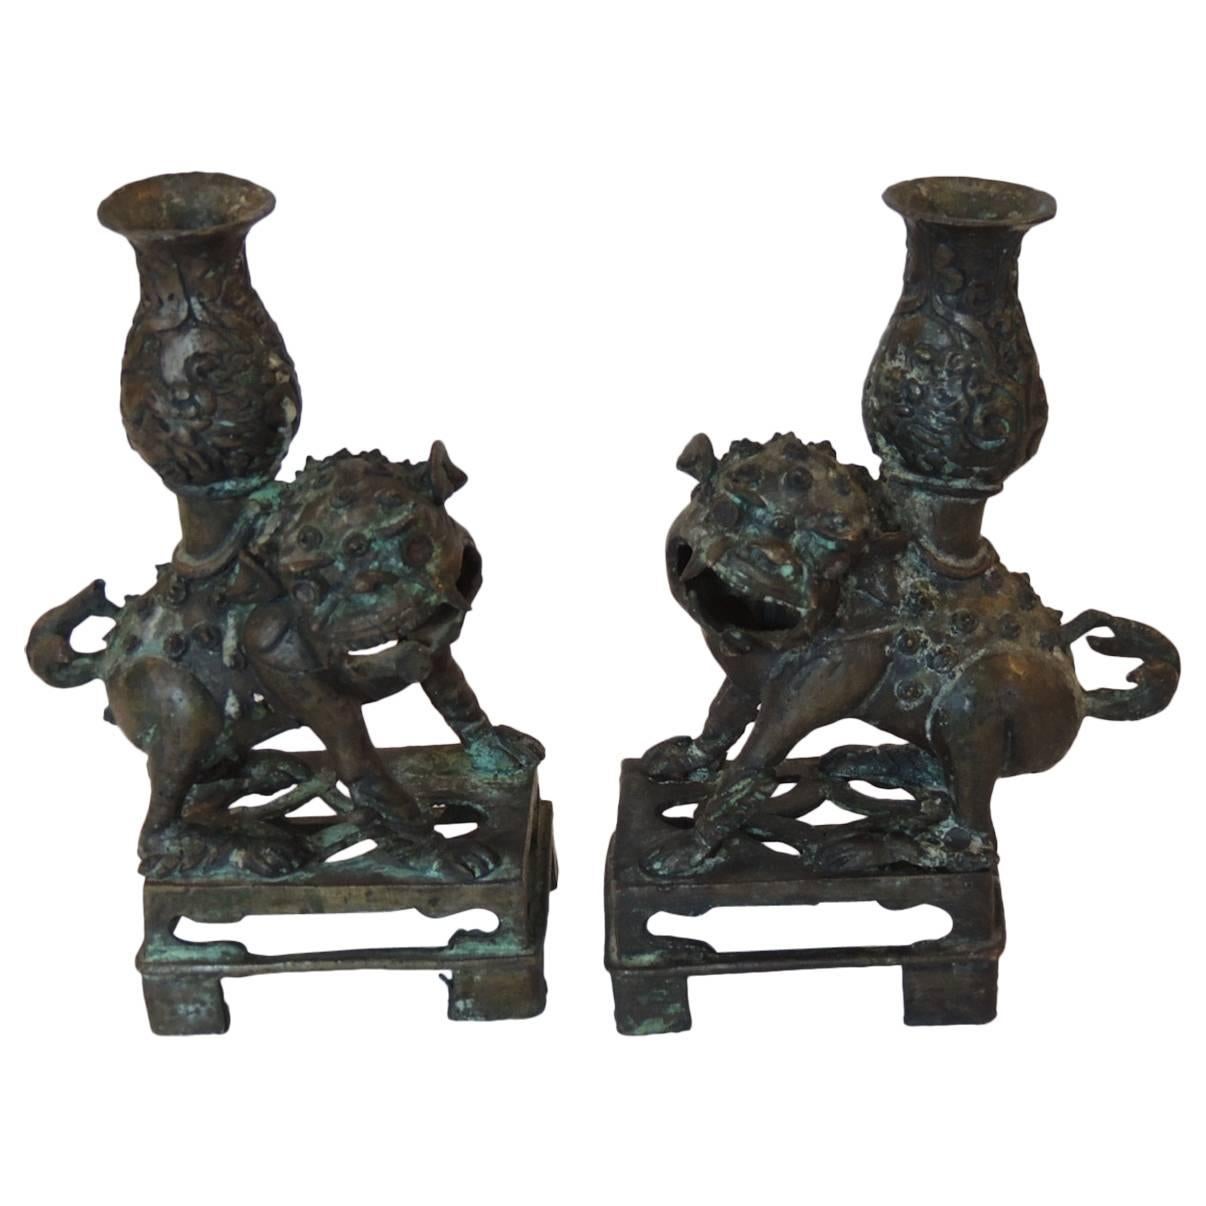 CLOSE OUT SALE: Pair of Antique Asian Bronze Foo Dogs Candle Holders